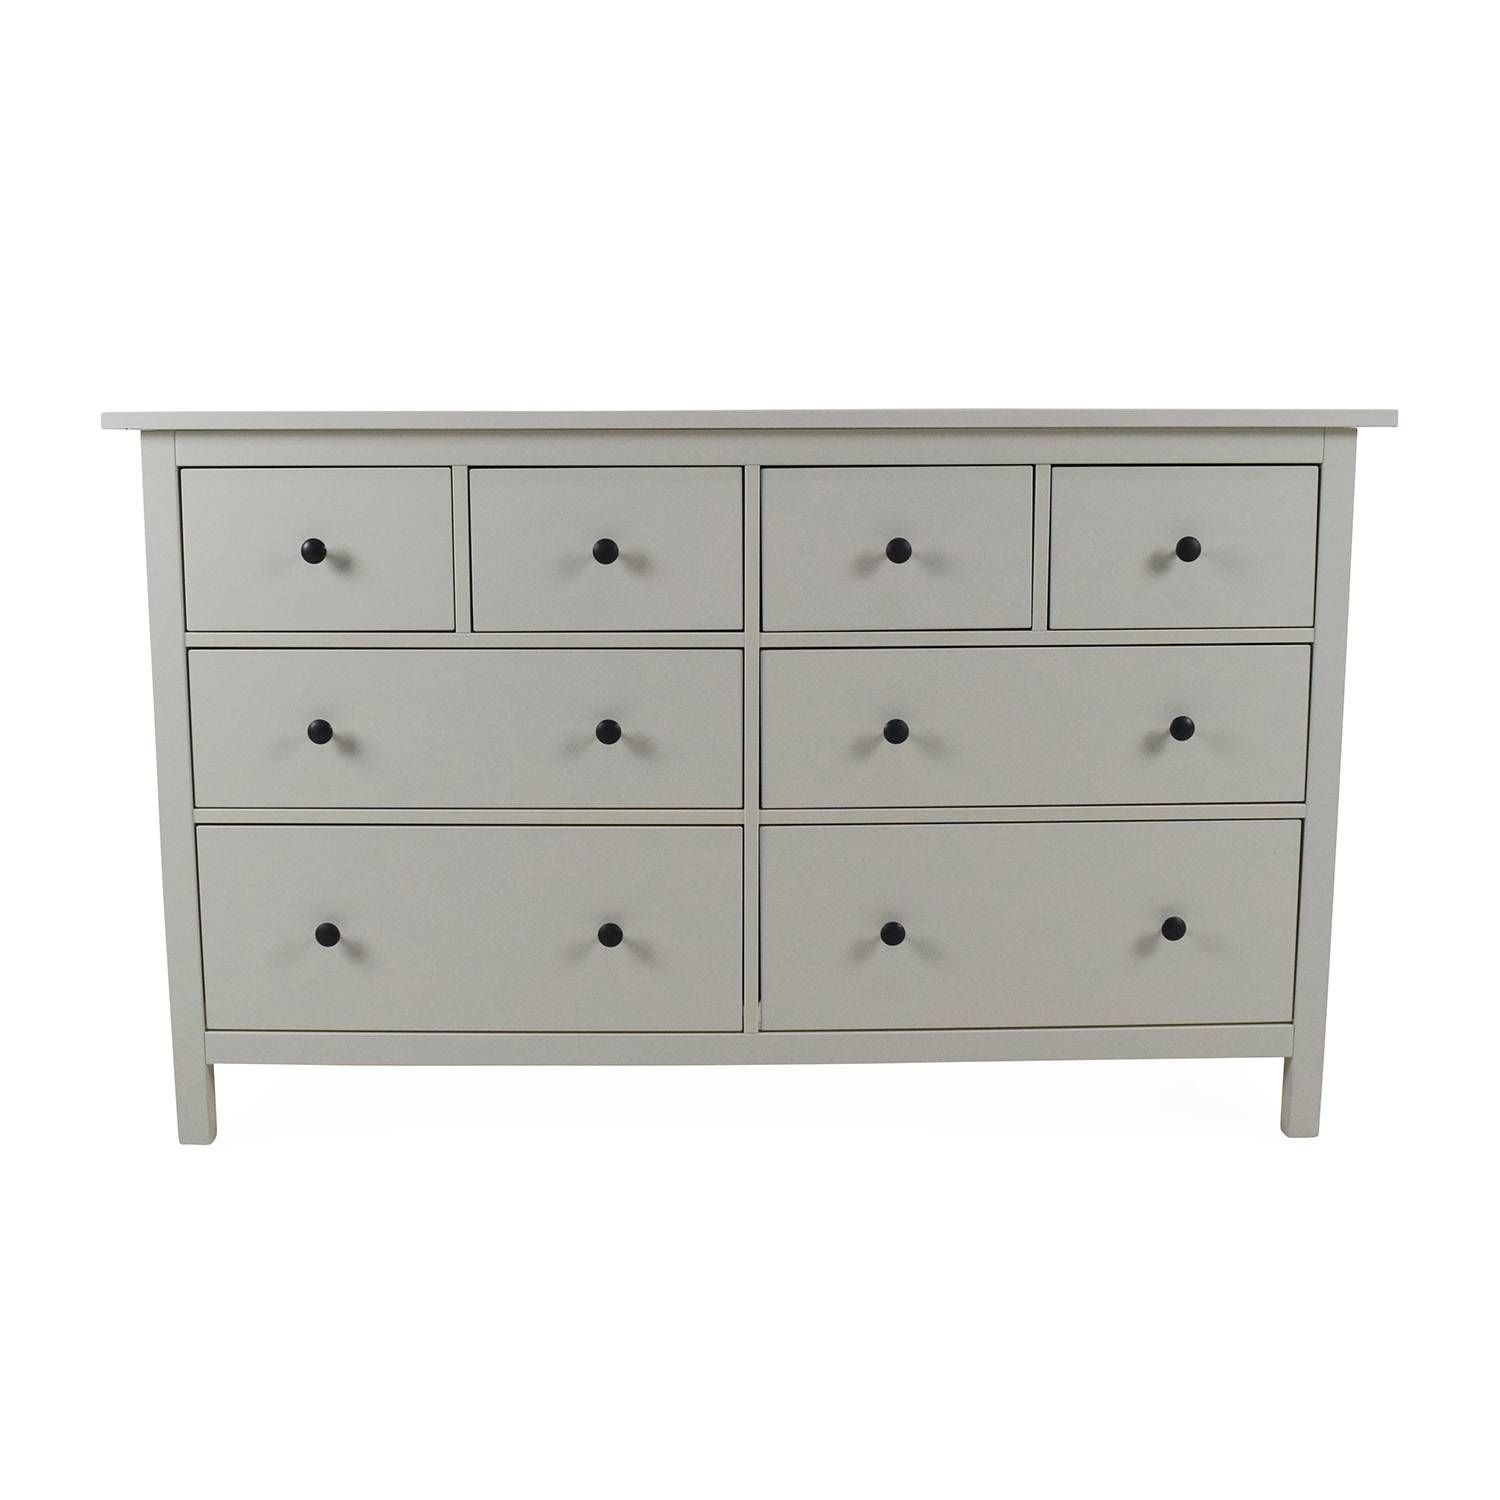 49% Off – Ikea Ikea Hemnes 8 Drawer Dresser / Storage Pertaining To Most Recent Second Hand Dressers And Sideboards (View 4 of 15)